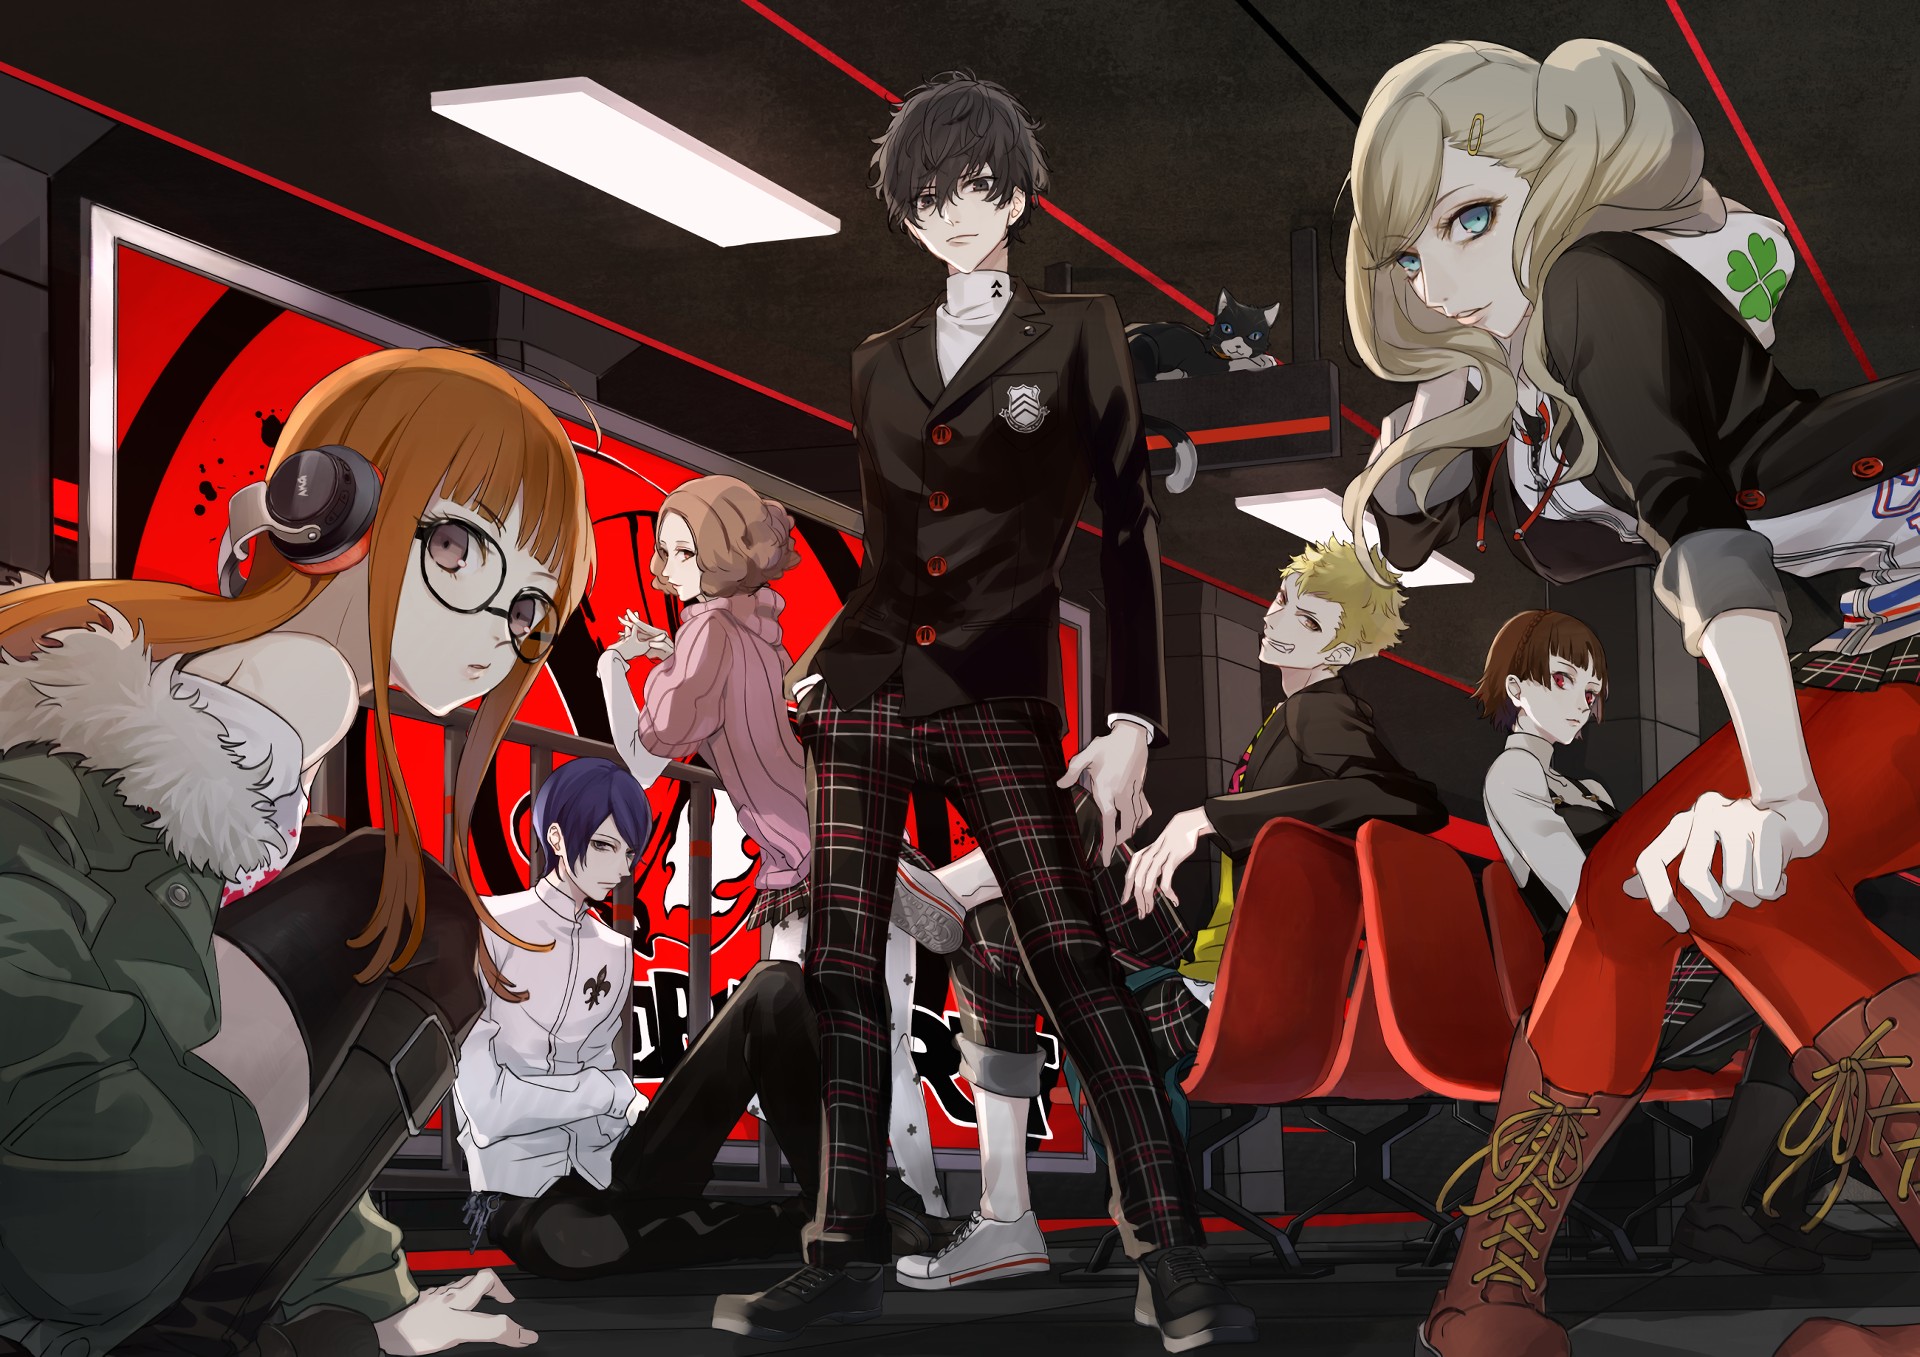 Persona 5 wallpaper ·① Download free full HD backgrounds for desktop, mobile, laptop in any ...